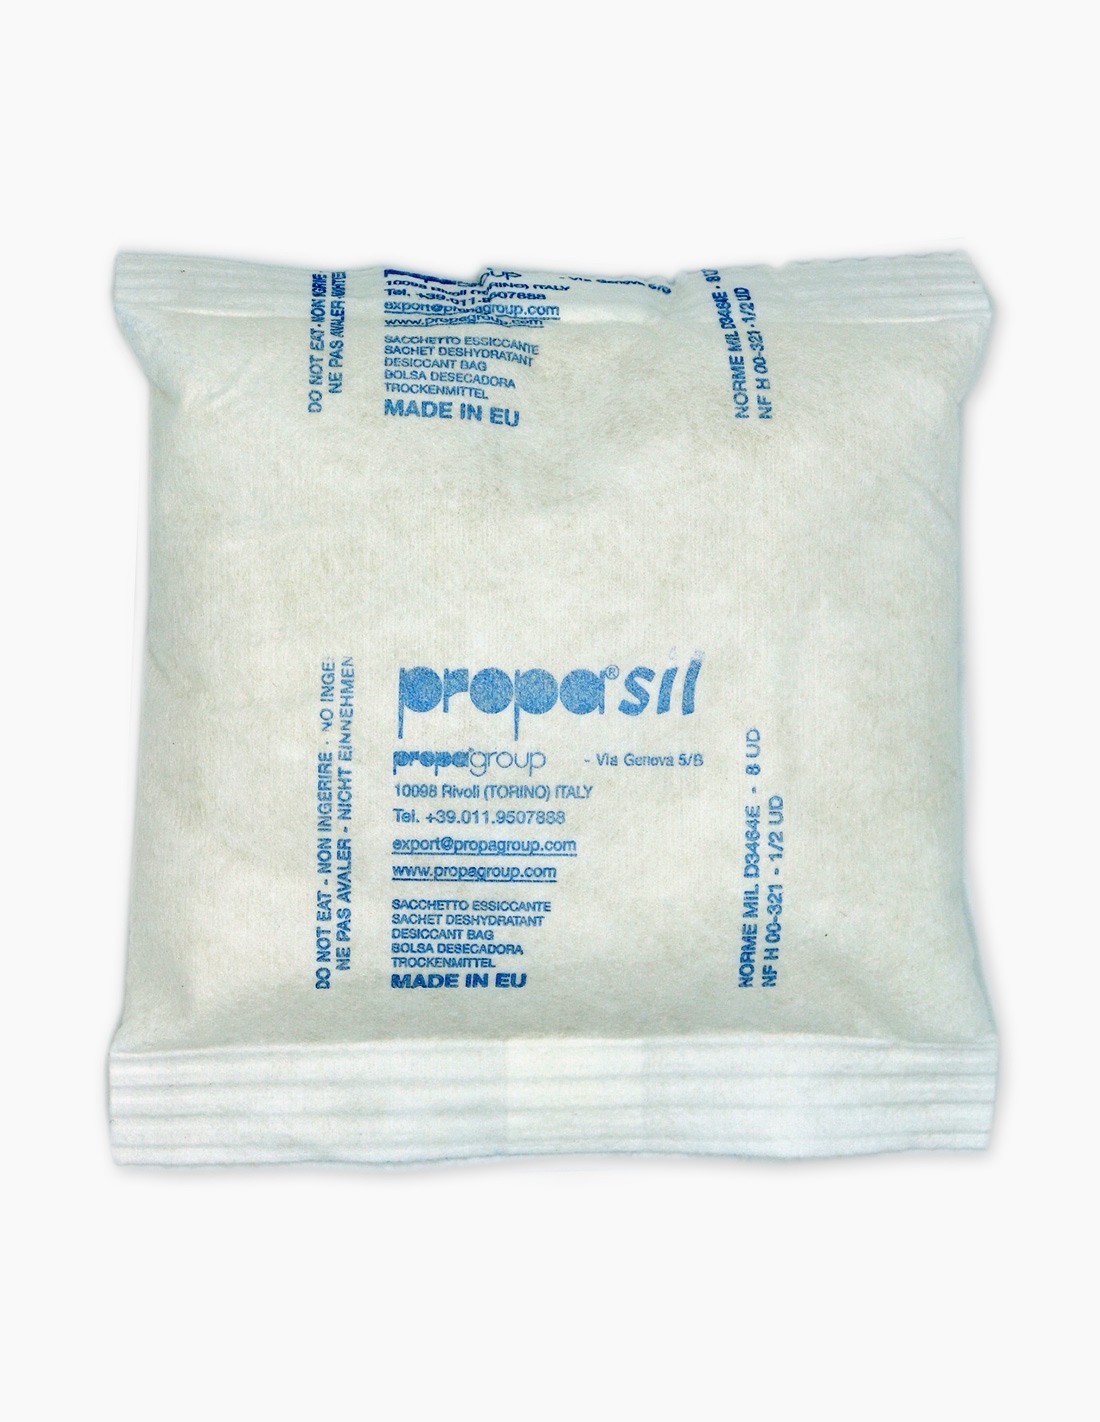 Silica Gel Packets (1/2gm to 10gm) — Hydrosorbent Desiccant Dehumidifiers